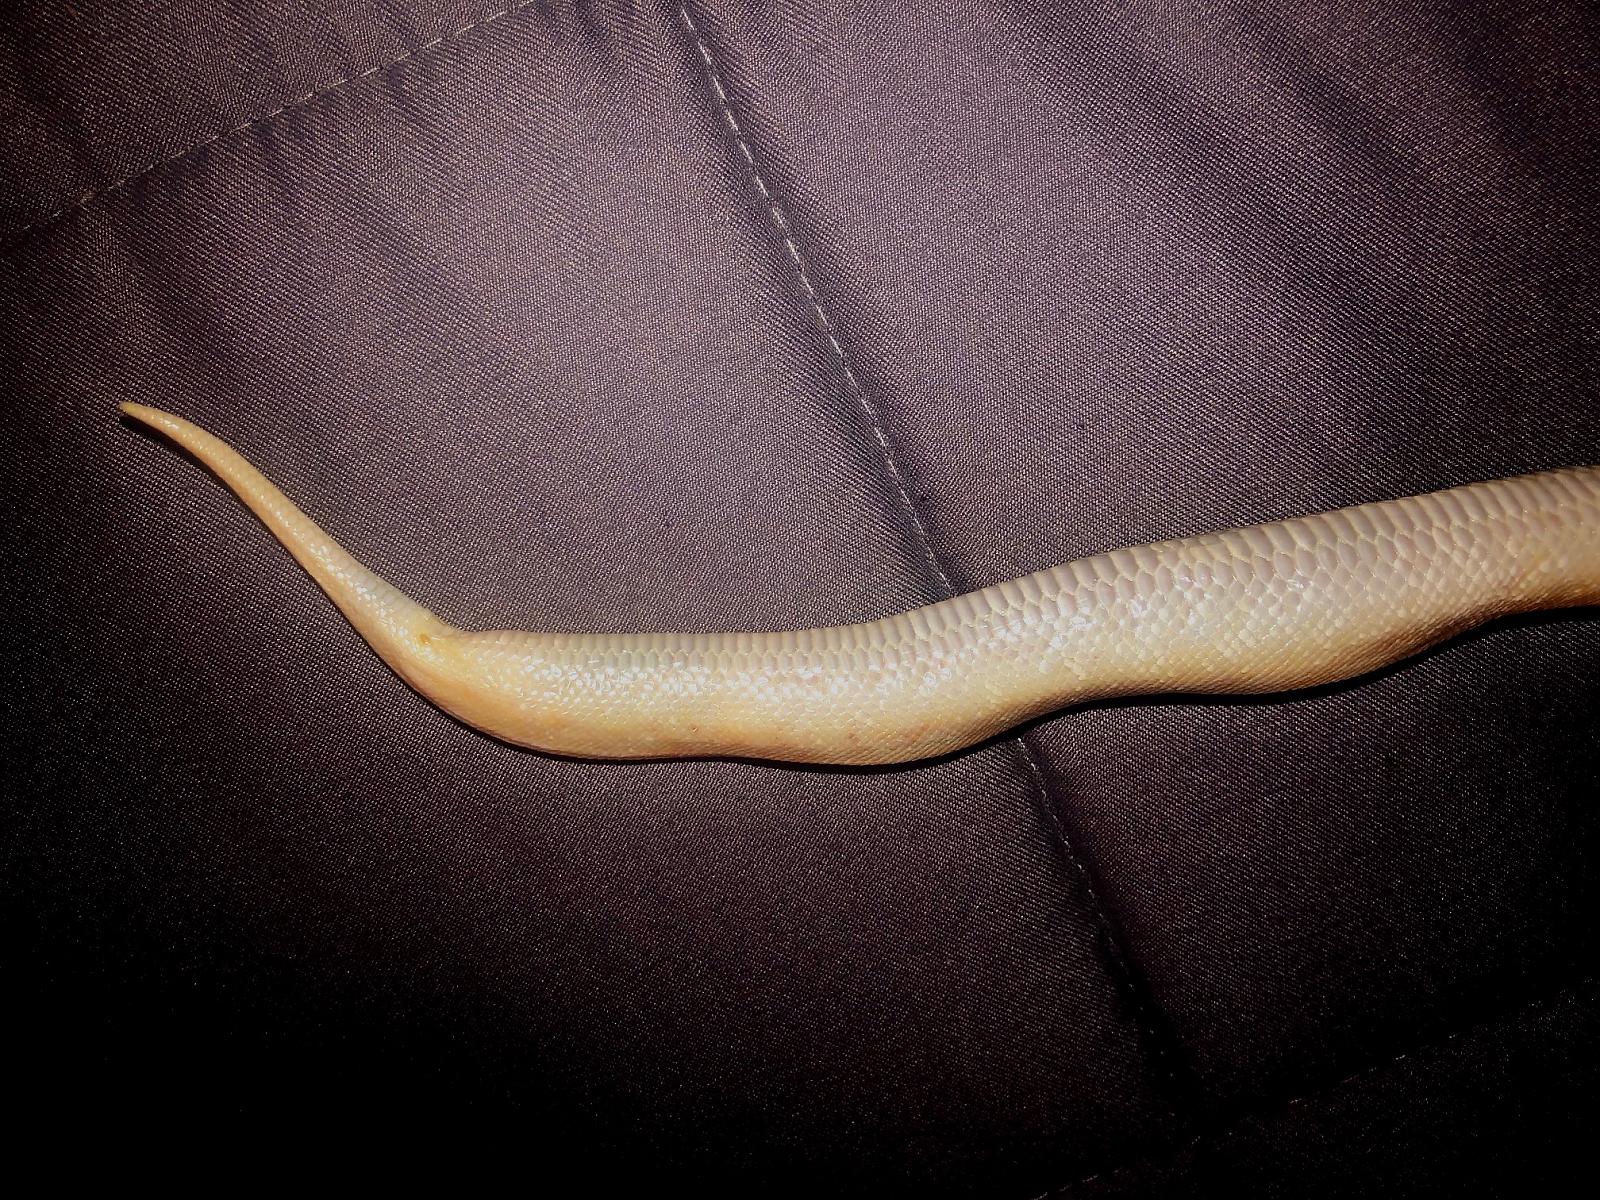 Danger Noodle during his illness/Septicemia?